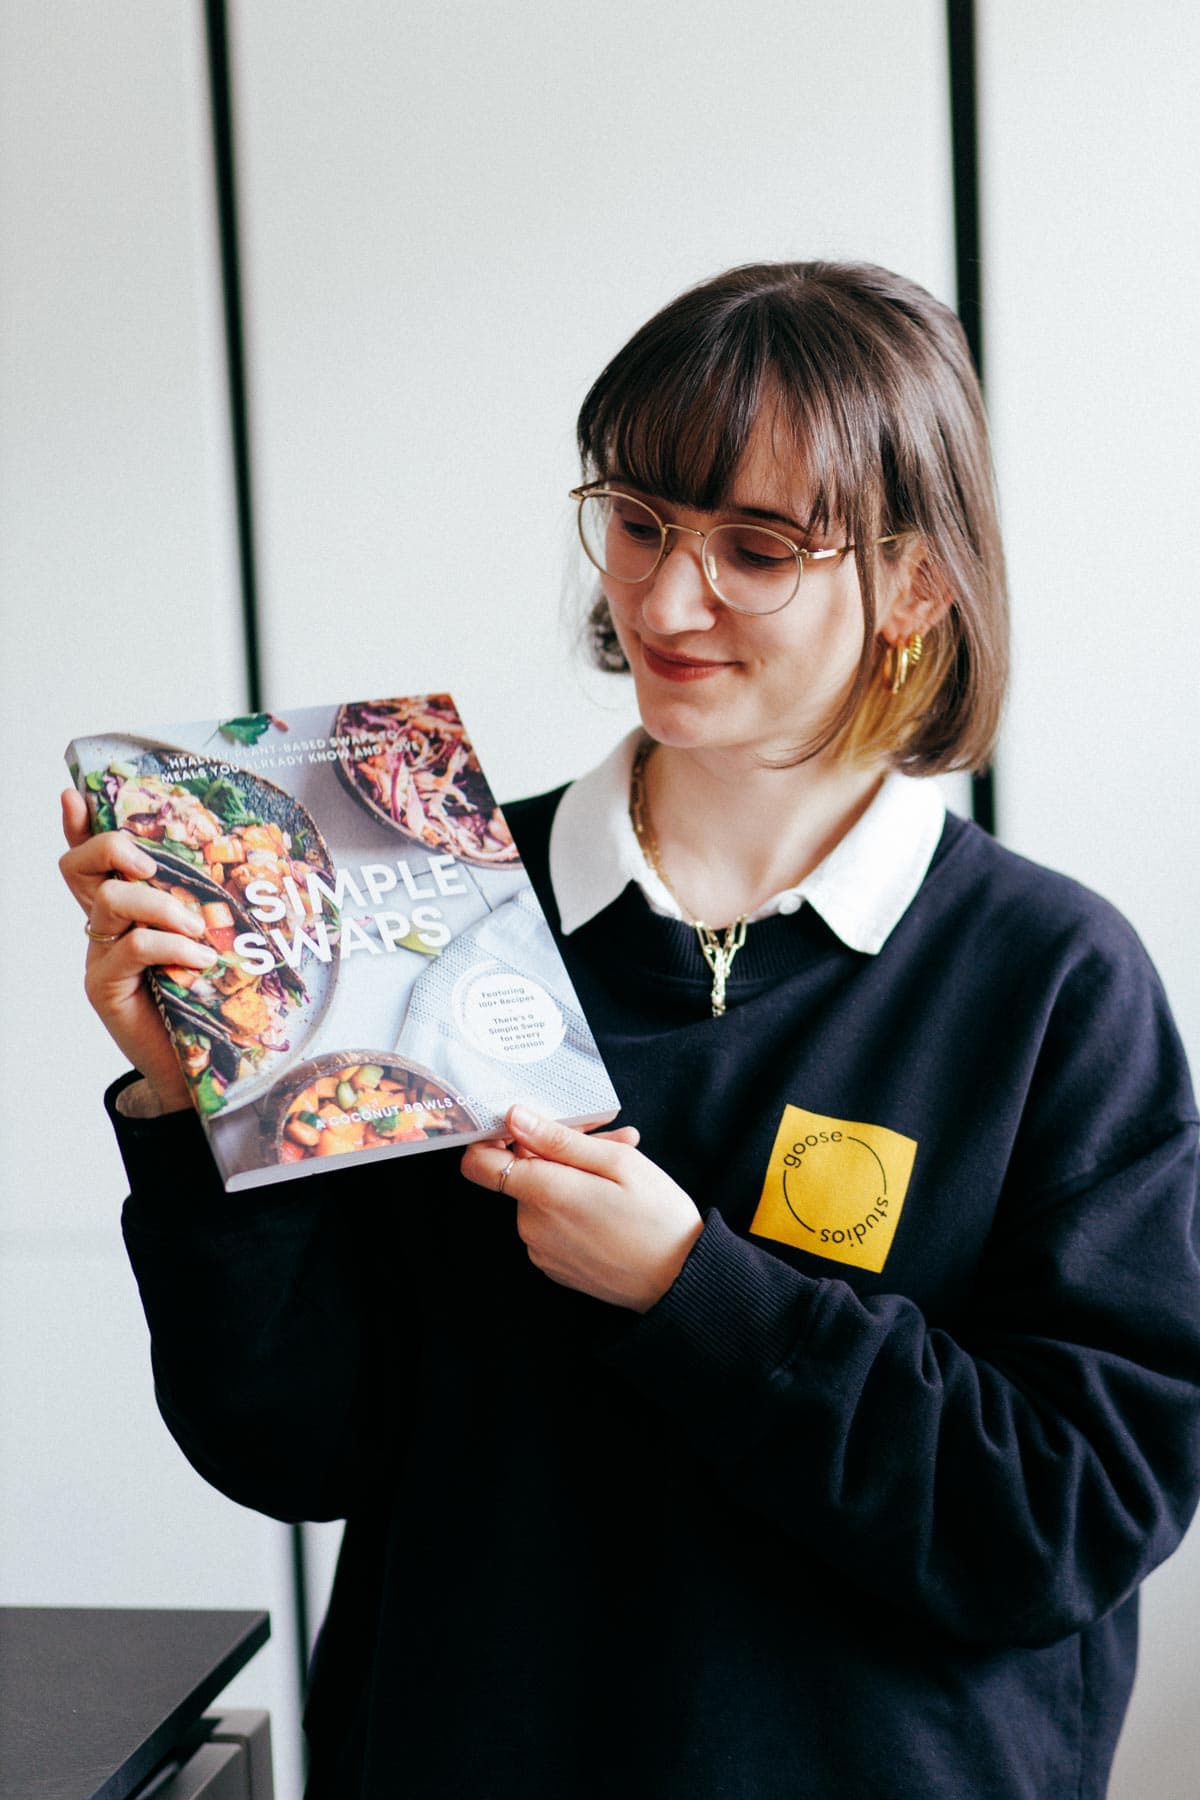 A woman holding out a cookbook and looking at it while wearing metal glasses and a black jumper.